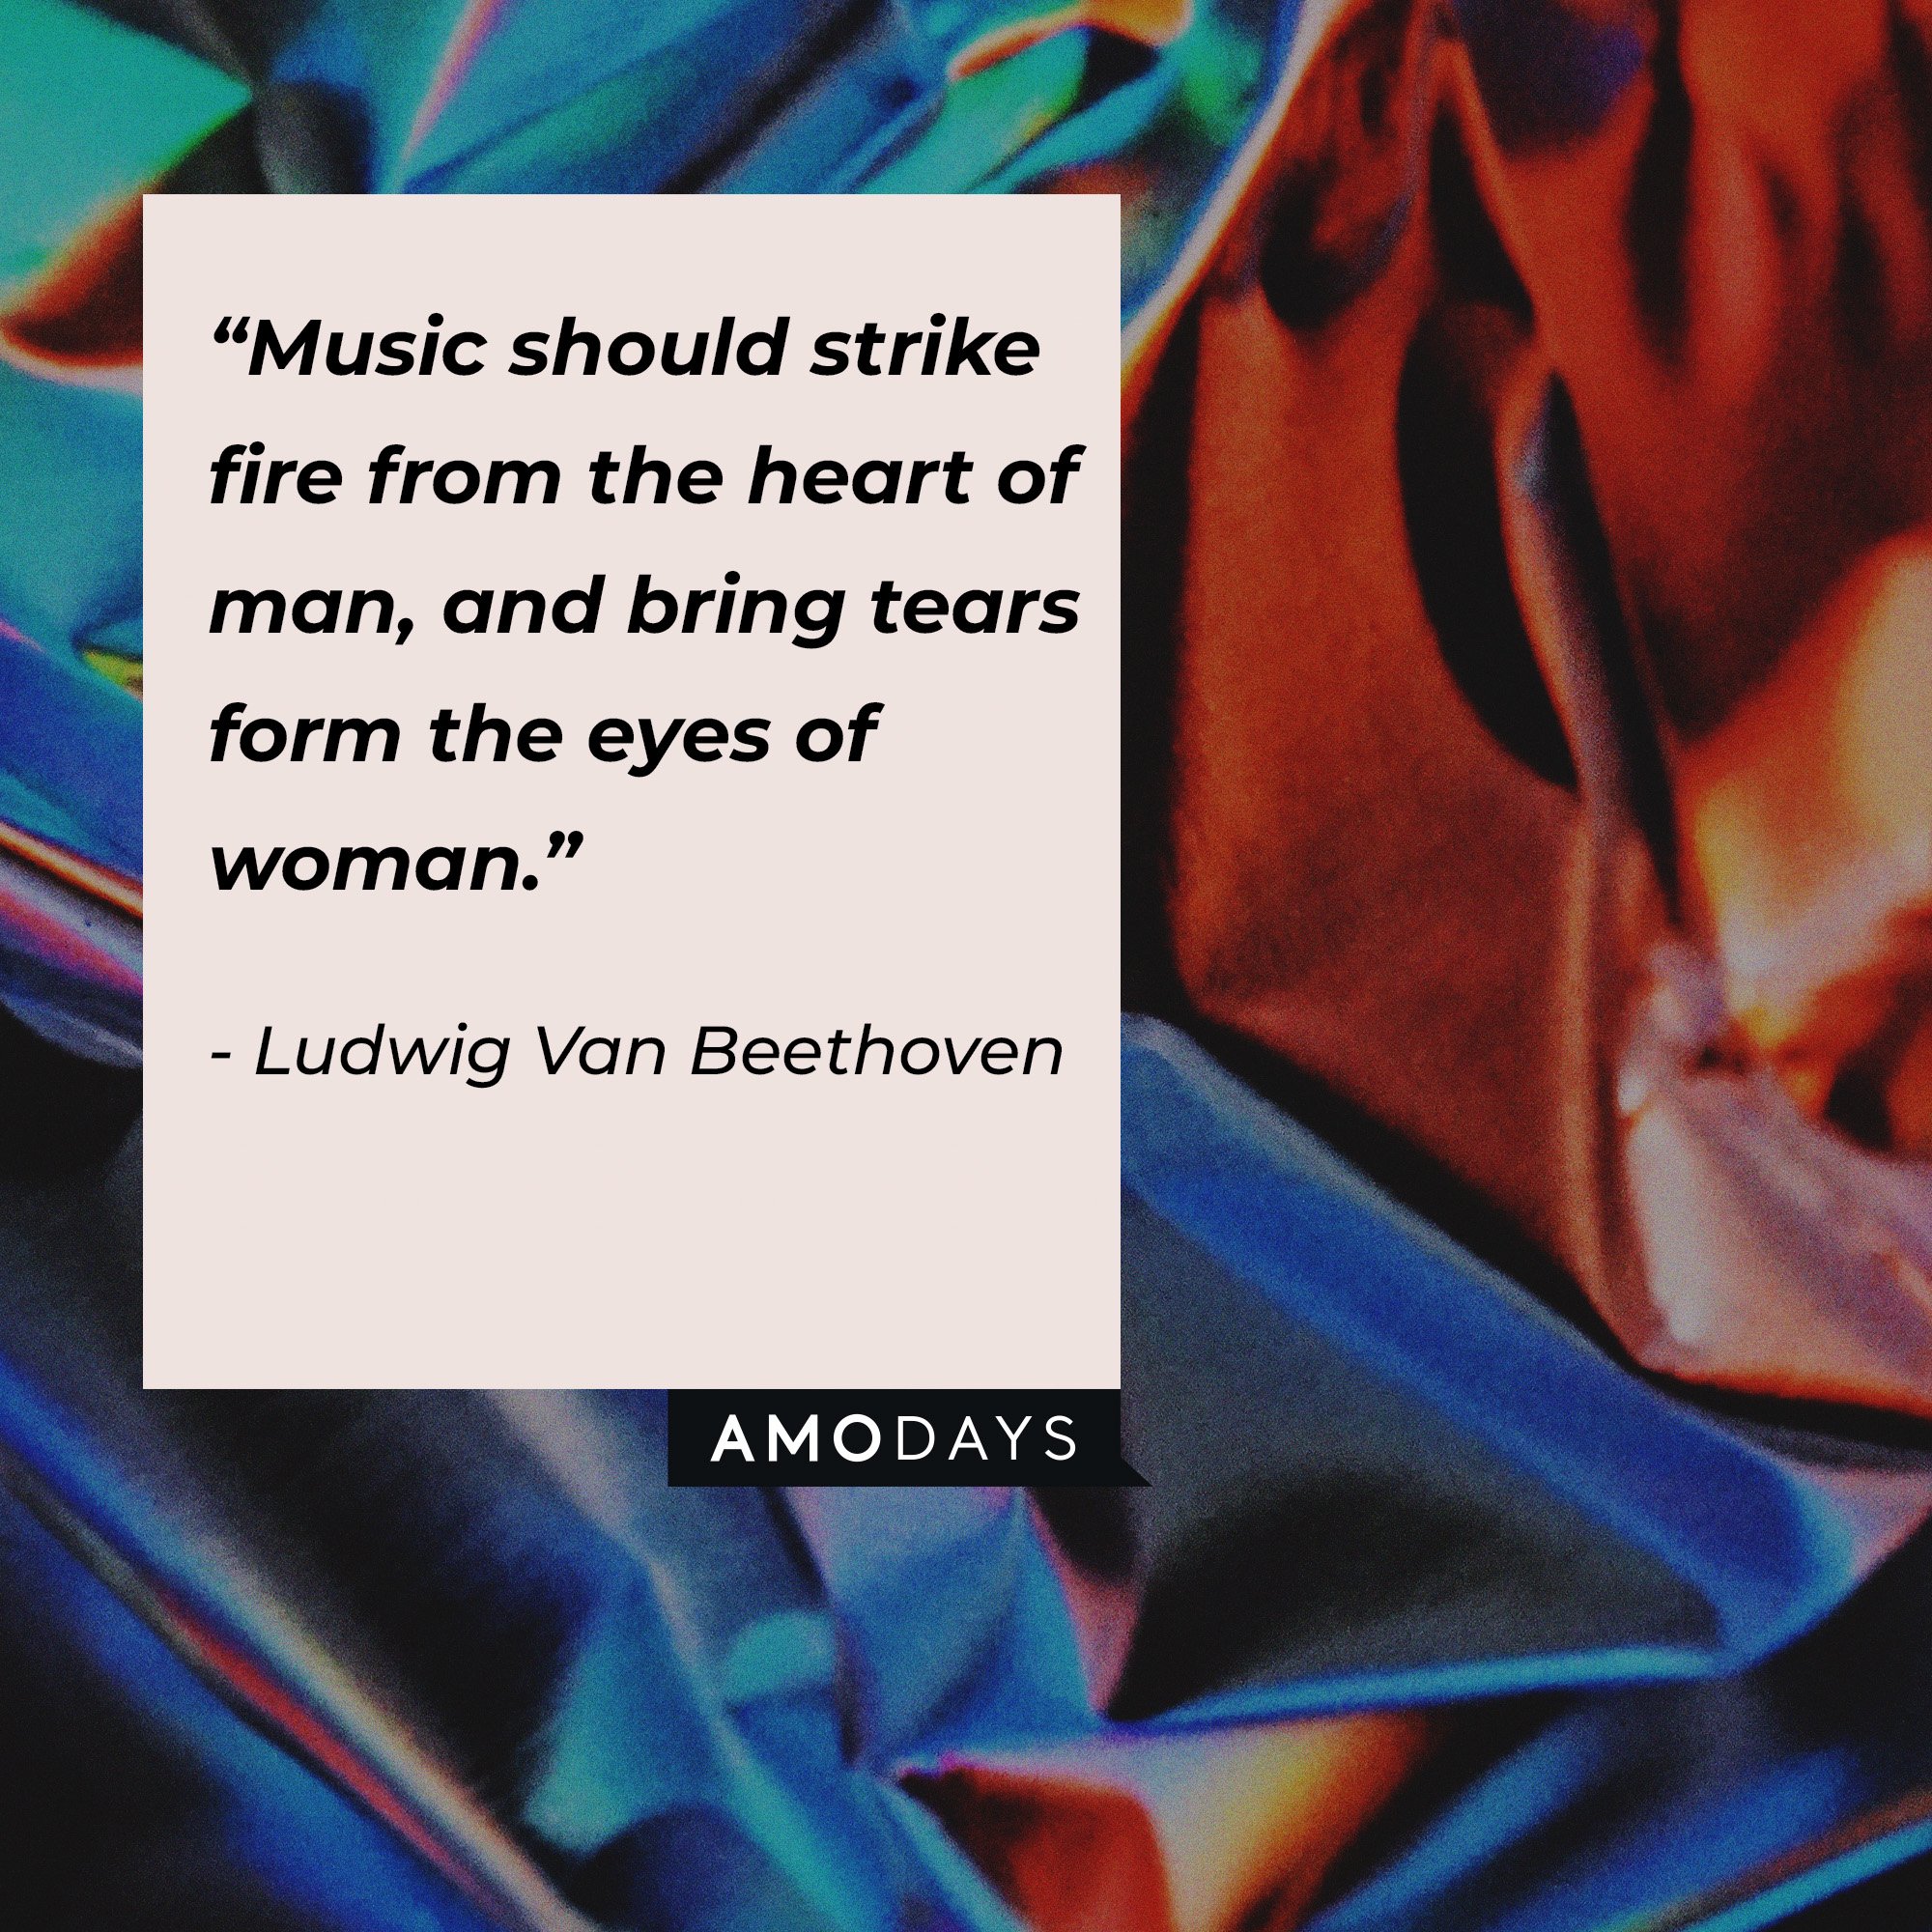  Ludwig Van Beethoven's quote: “Music should strike fire from the heart of man, and bring tears from the eyes of a woman.” | Image: AmoDays